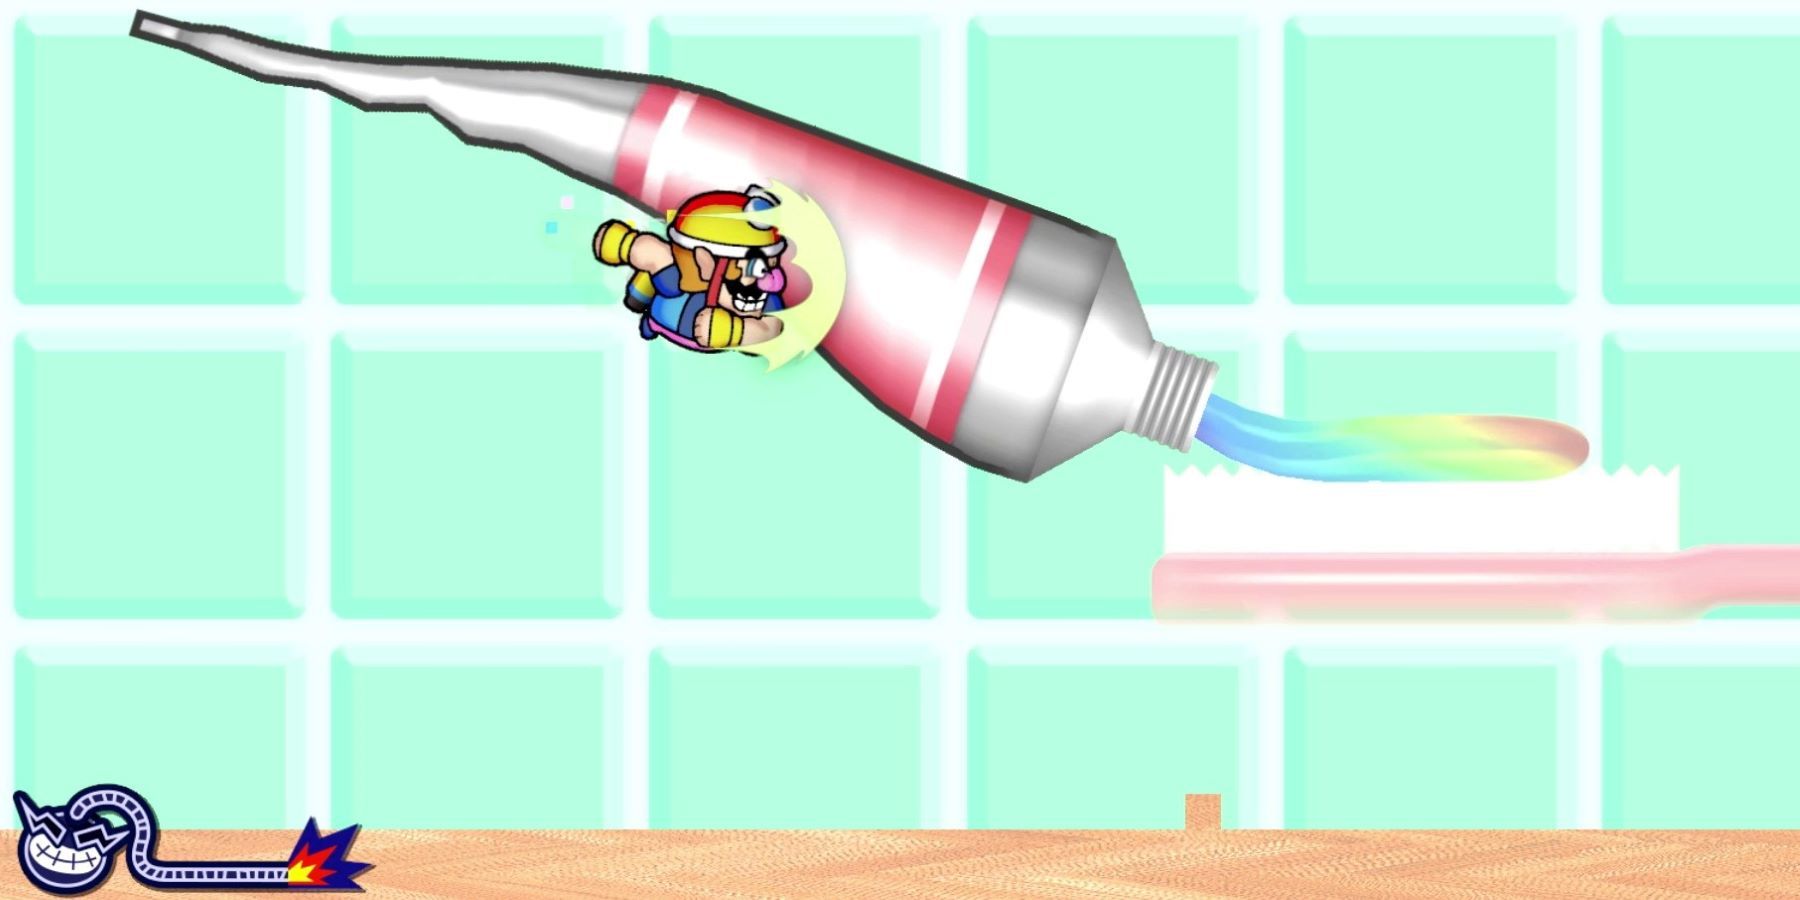 Wario squeezing toothpaste in a WarioWare: Get it Together! minigame